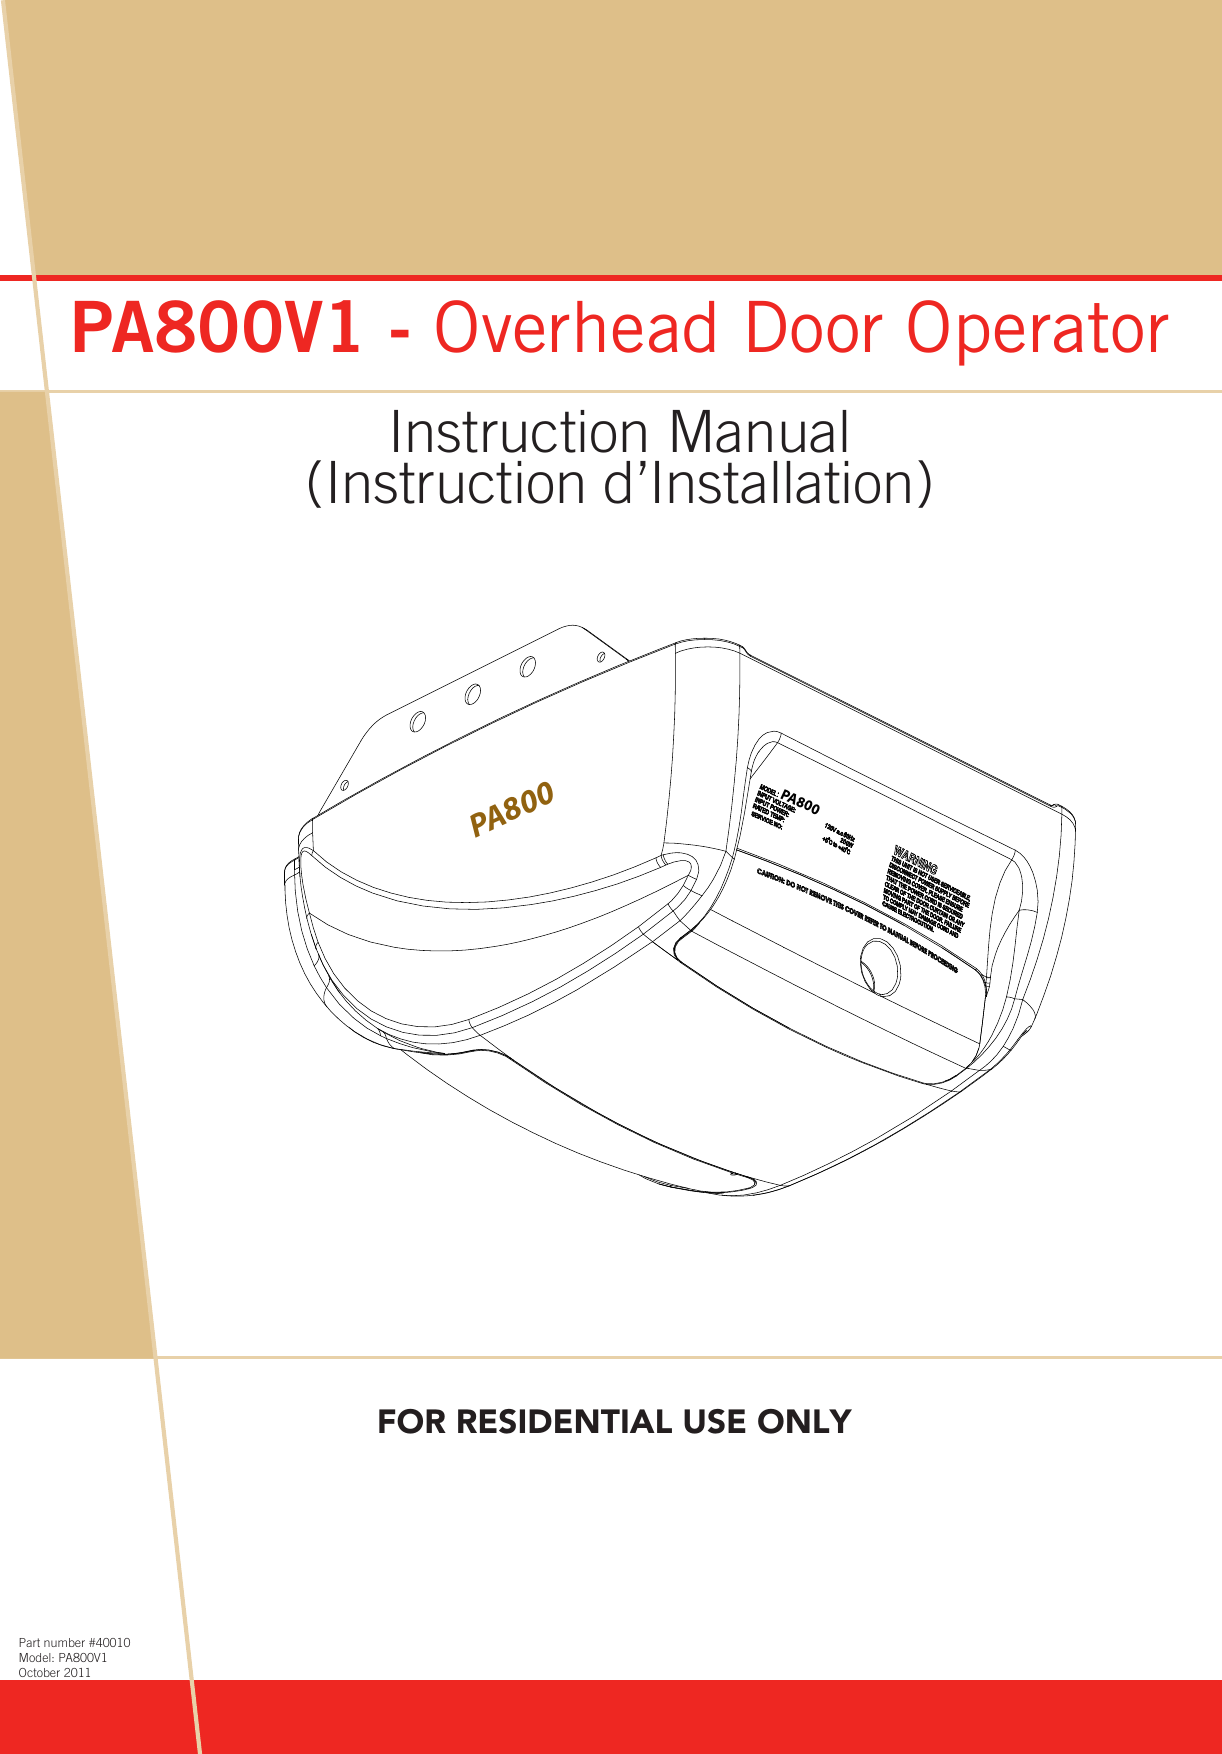 www.bnd.com.auPA800V1 - Overhead Door OperatorInstruction Manual Part number #40010Model: PA800V1October 2011PA800PA800FOR RESIDENTIAL USE ONLY(Instruction d’Installation)